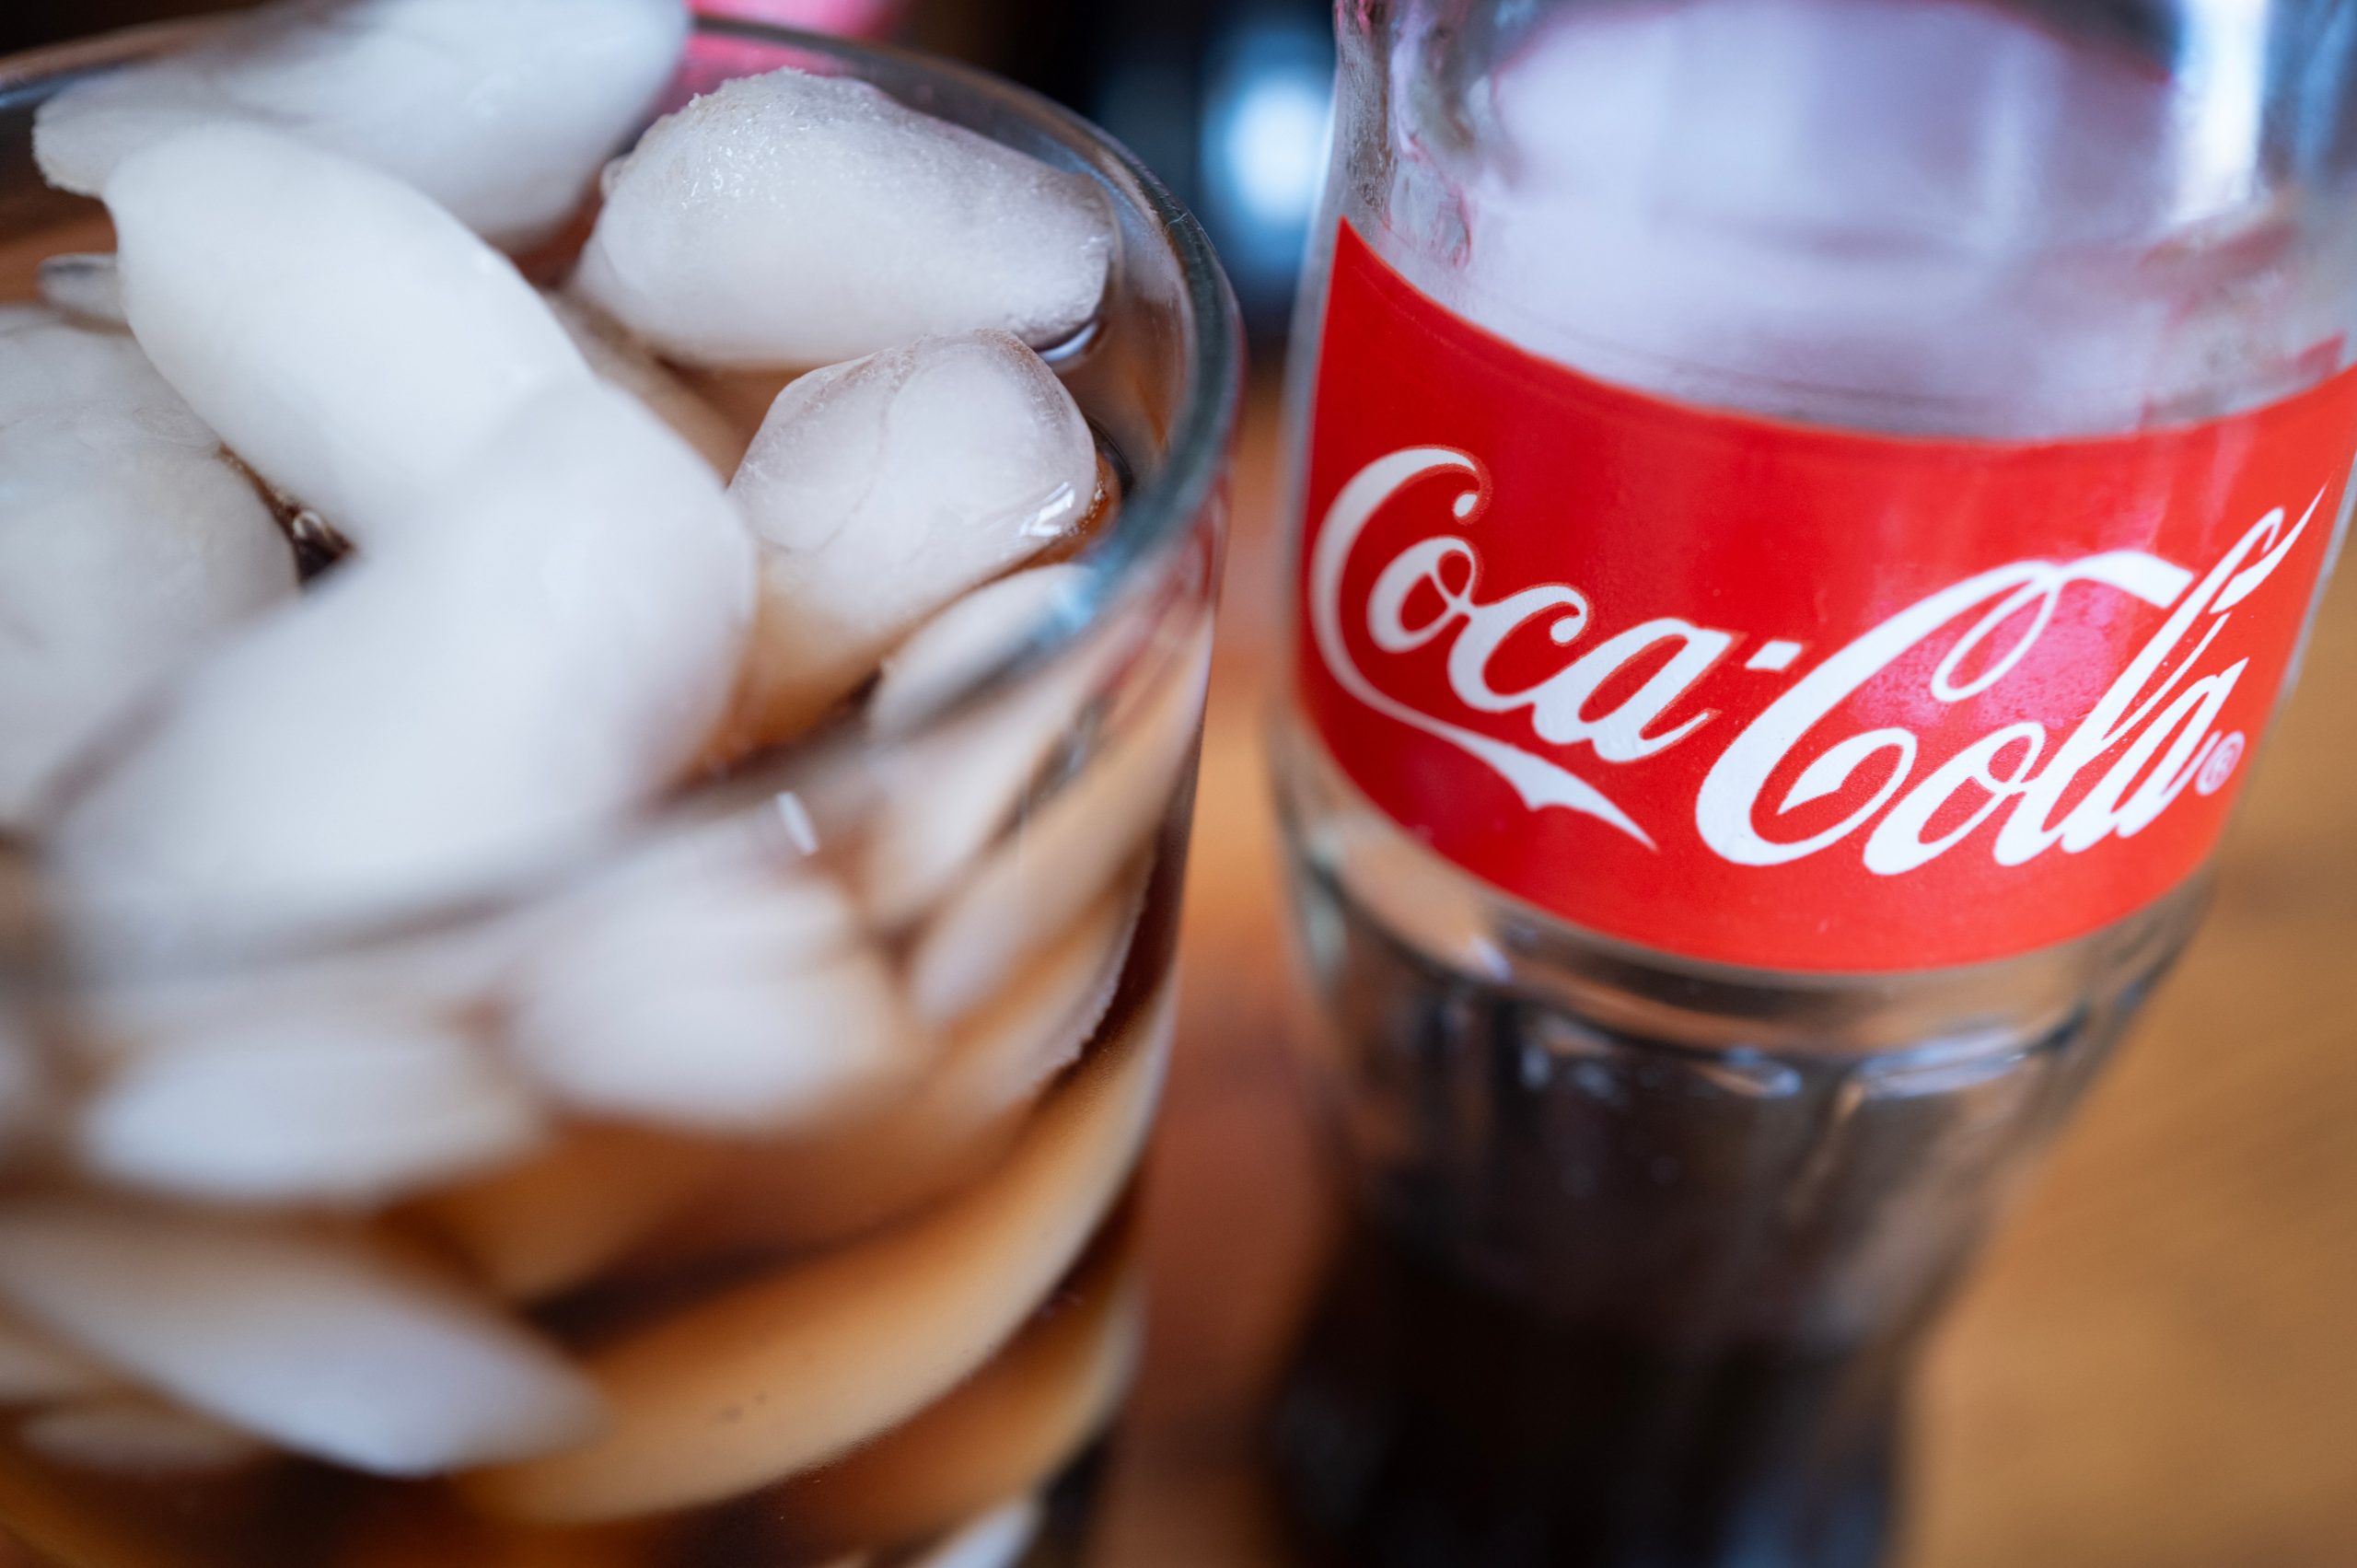 Coca-Cola’s popularity shows no signs of waning